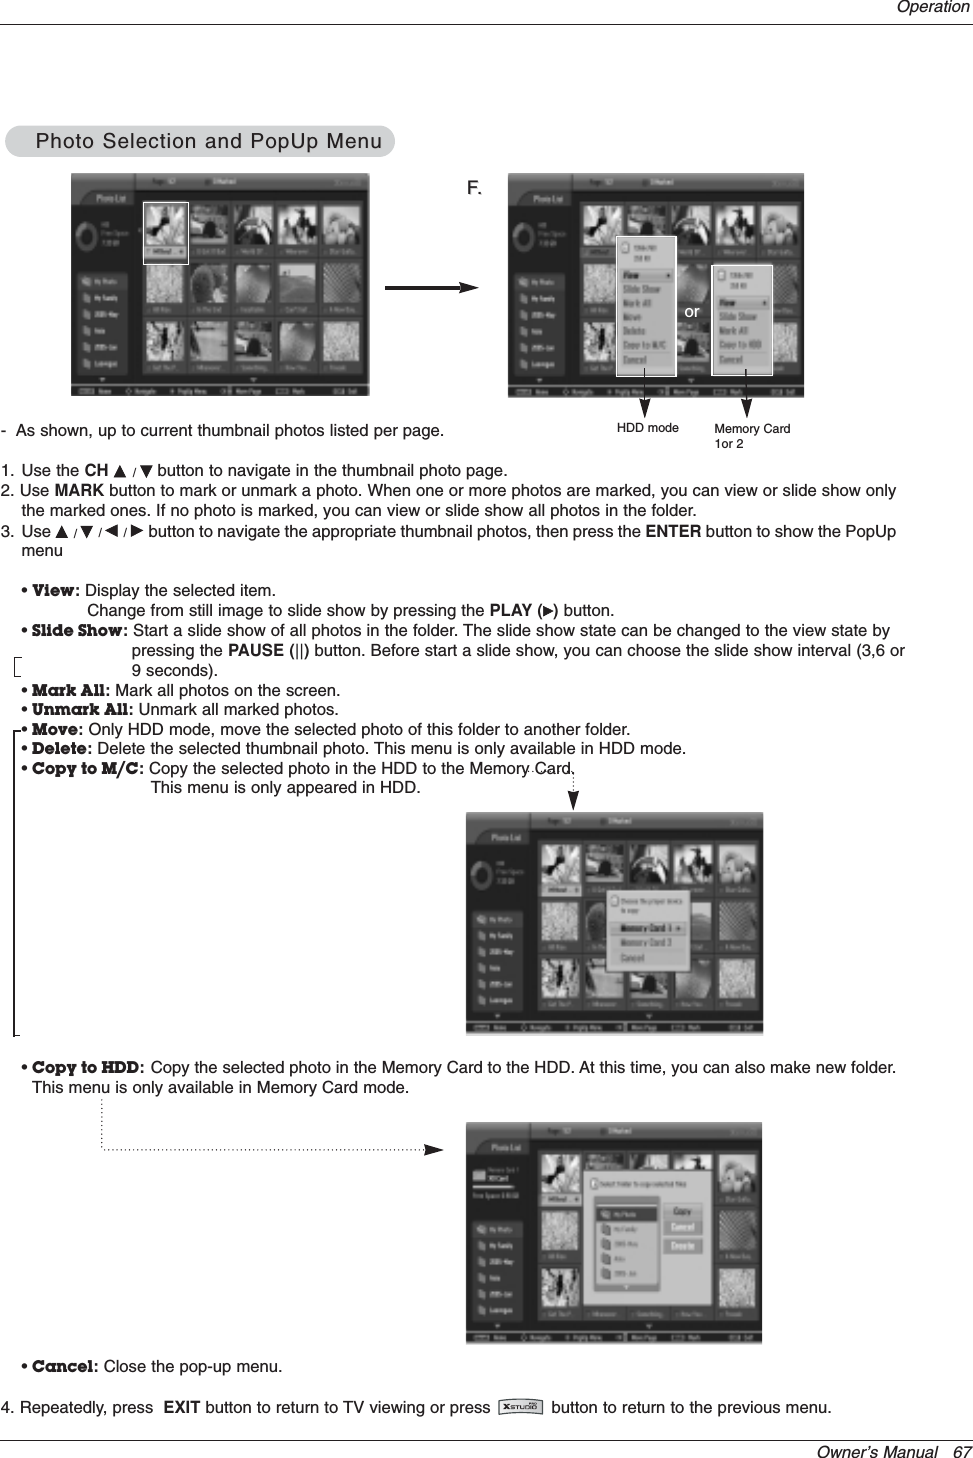 Owner’s Manual   67Operation-  As shown, up to current thumbnail photos listed per page.1. Use the CH D/Ebutton to navigate in the thumbnail photo page.2. Use MARK button to mark or unmark a photo. When one or more photos are marked, you can view or slide show onlythe marked ones. If no photo is marked, you can view or slide show all photos in the folder.3. Use D/E/F/Gbutton to navigate the appropriate thumbnail photos, then press the ENTER button to show the PopUpmenu•View:Display the selected item. Change from still image to slide show by pressing the PLAY (G)button.•Slide Show:Start a slide show of all photos in the folder. The slide show state can be changed to the view state by pressing the PAUSE (||) button. Before start a slide show, you can choose the slide show interval (3,6 or9 seconds).•Mark All:Mark all photos on the screen.•Unmark All:Unmark all marked photos.•Move:Only HDD mode, move the selected photo of this folder to another folder.•Delete:Delete the selected thumbnail photo. This menu is only available in HDD mode.•Copy to M/C:Copy the selected photo in the HDD to the Memory Card. This menu is only appeared in HDD.•Copy to HDD:Copy the selected photo in the Memory Card to the HDD. At this time, you can also make new folder.This menu is only available in Memory Card mode. •Cancel:Close the pop-up menu.4. Repeatedly, press  EXIT button to return to TV viewing or press            button to return to the previous menu.FF..orHDD mode Memory Card1or 2Photo Selection and PopUp MenuPhoto Selection and PopUp Menu